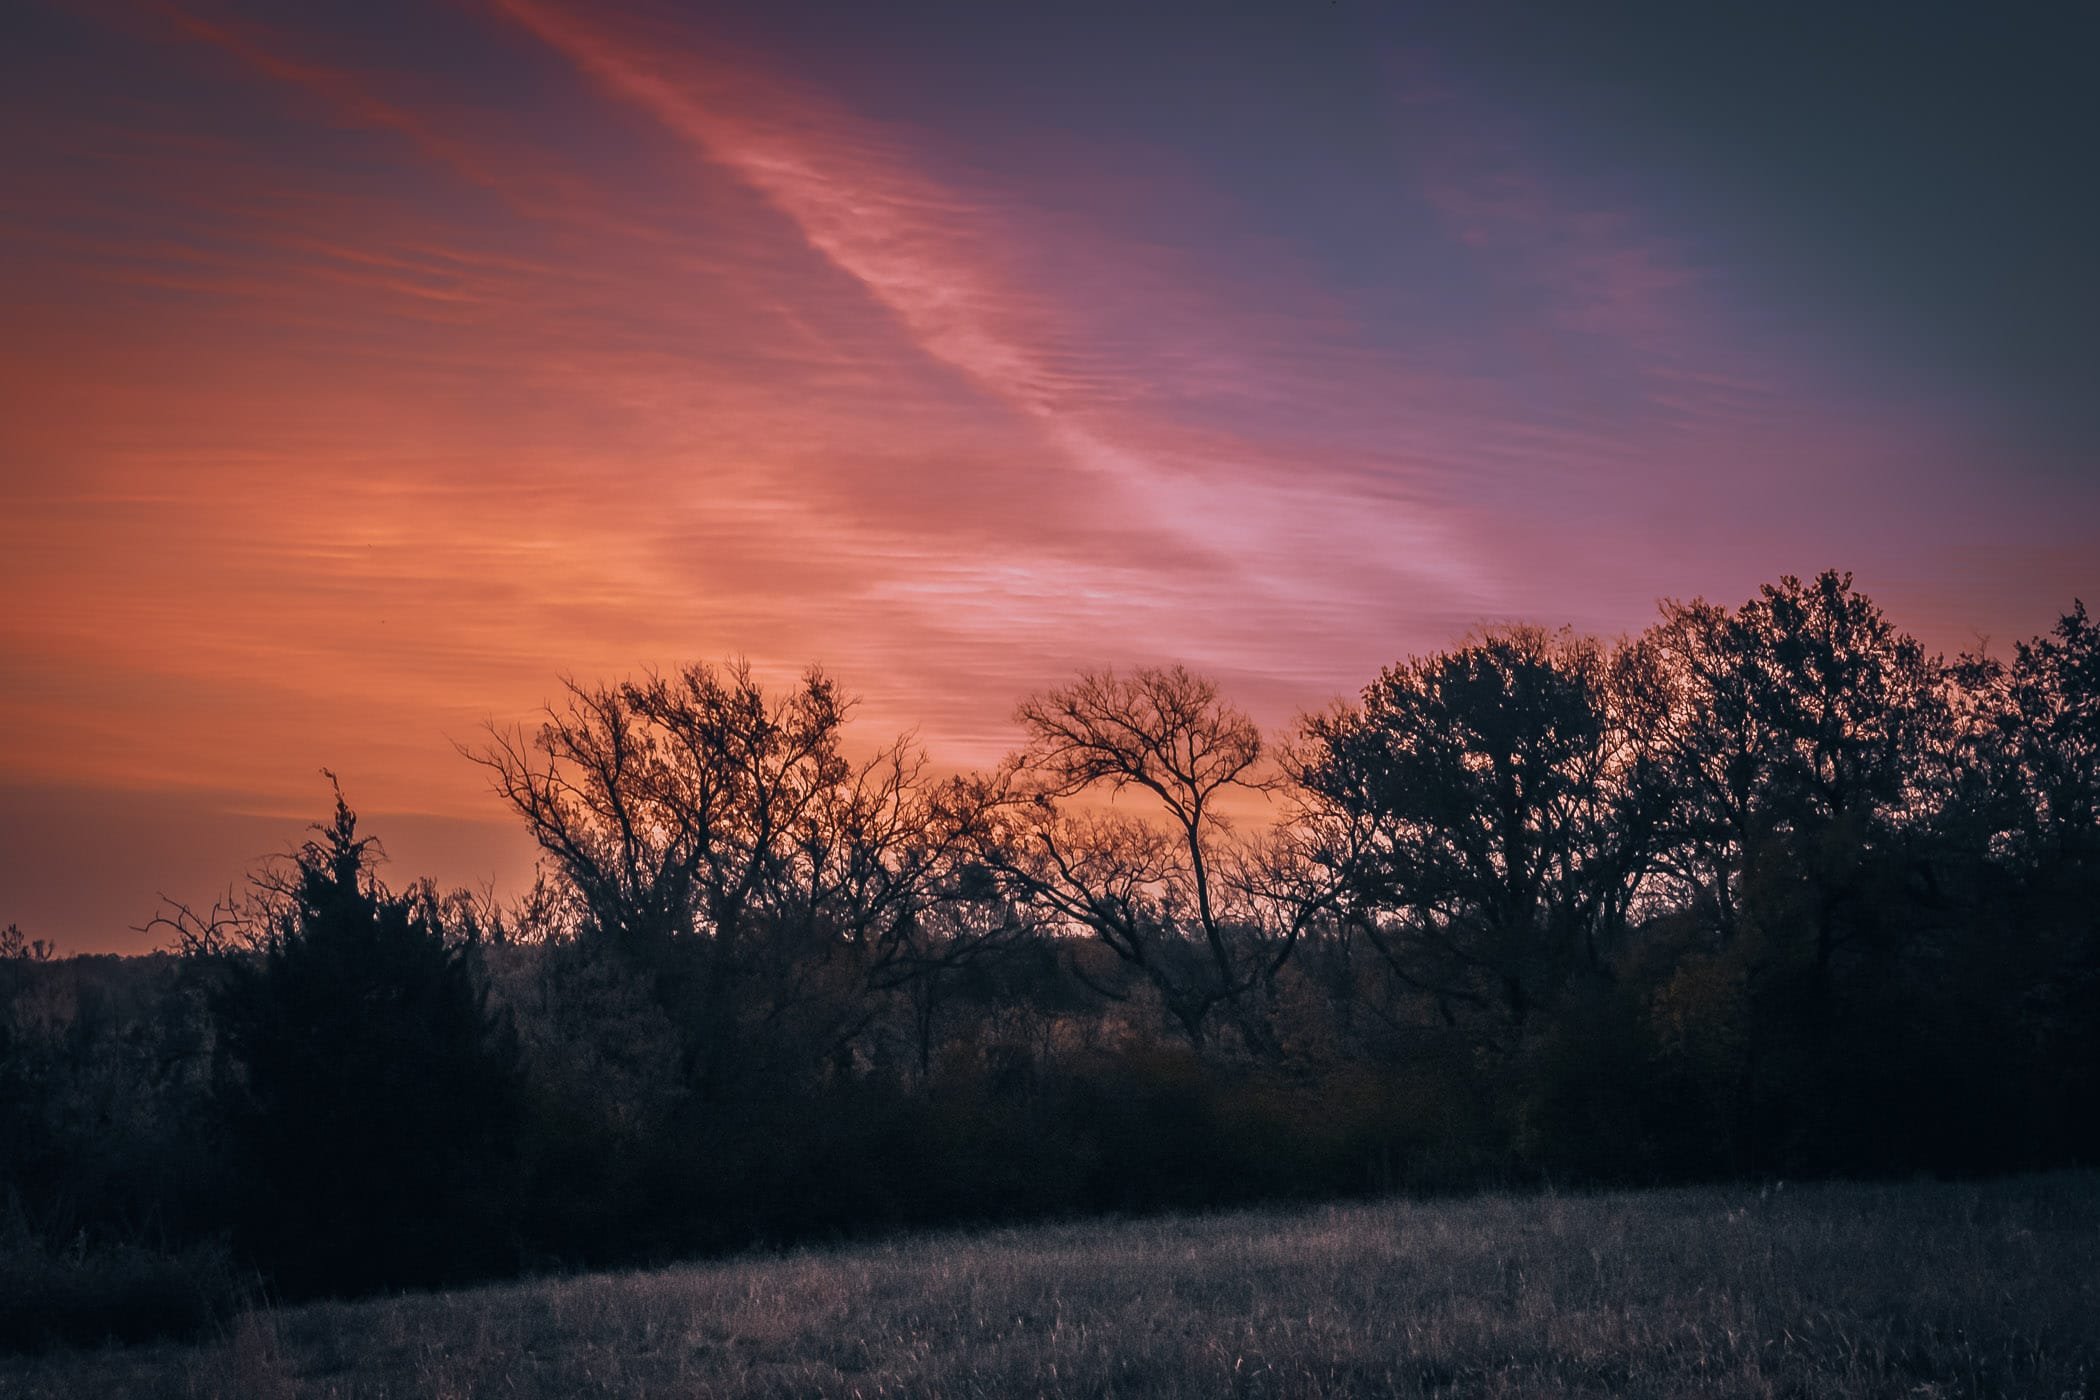 The sun rises on trees at Fort Worth, Texas' Tandy Hills Natural Area.